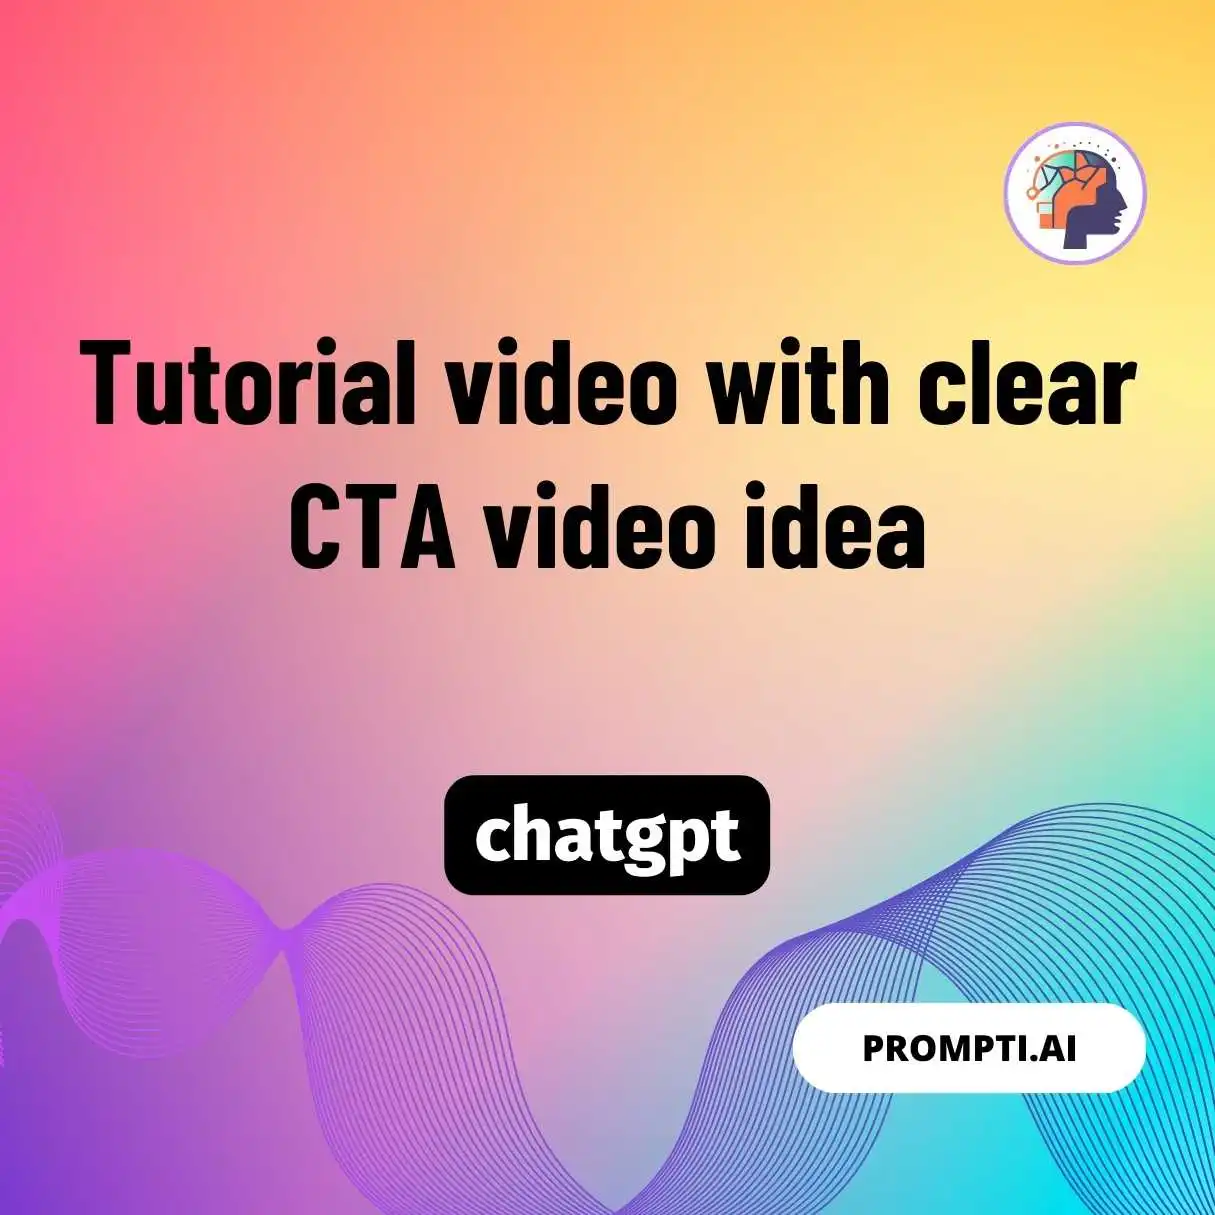 Tutorial video with clear CTA video idea